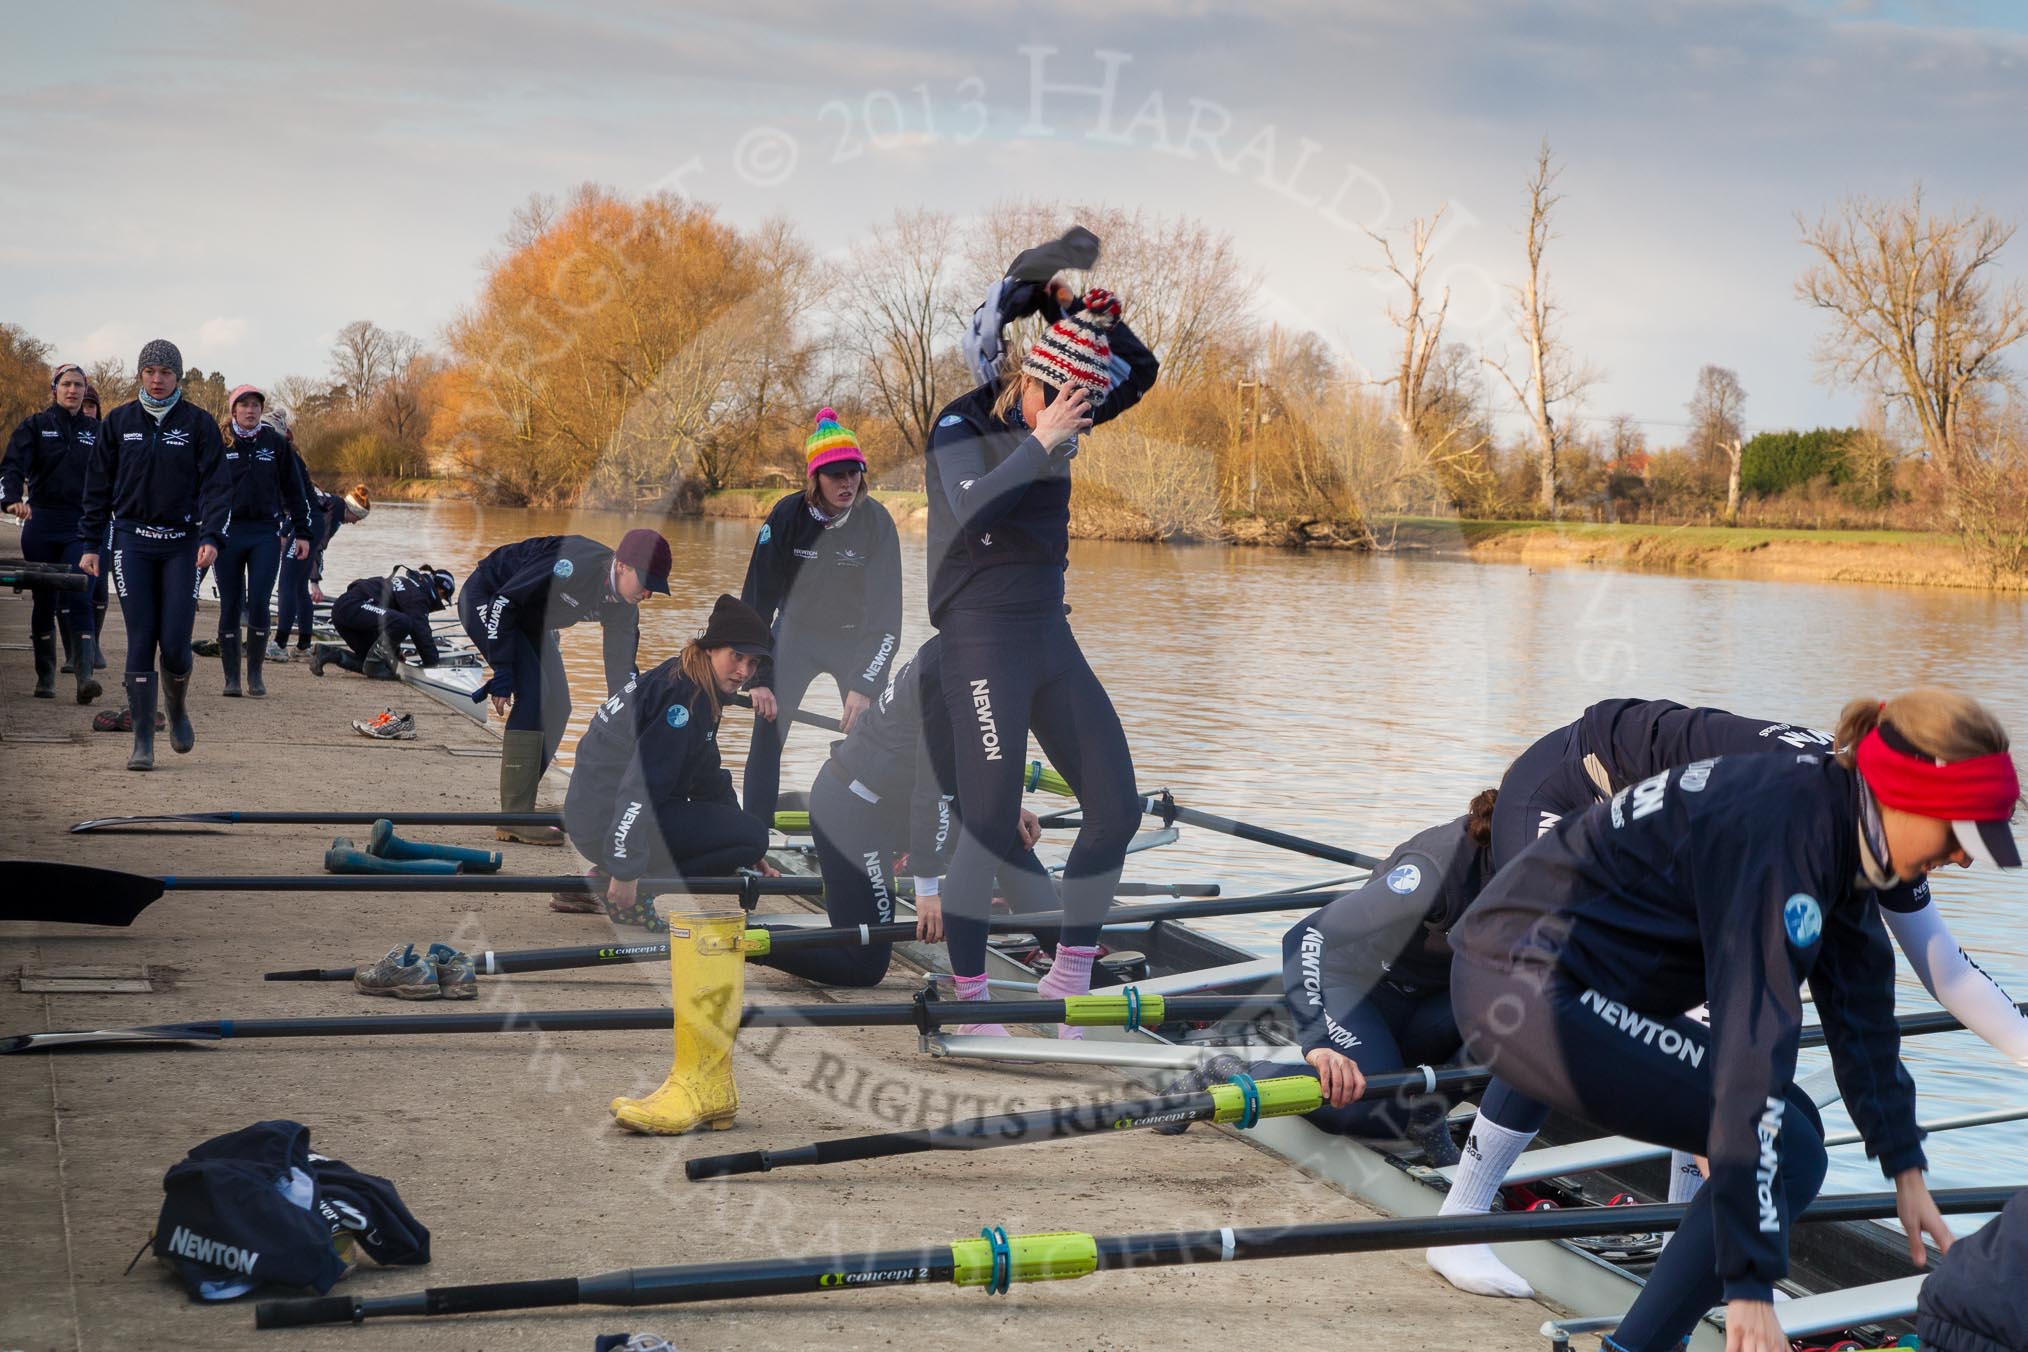 The Boat Race season 2013 - OUWBC training: The OUWBC Blue Boat squad getting ready at Fleming Boathouse - bow Mariann Novak, Alice Carrington-Windo, Mary Foord-Weston, Jo Lee, Amy Varney, Harriet Keane, Anastasia Chitty, stroke Maxie Scheske, and cox Katie Apfelbaum. In the background the Osiris crew..
Fleming Boathouse,
Wallingford,
Oxfordshire,
United Kingdom,
on 13 March 2013 at 16:50, image #24